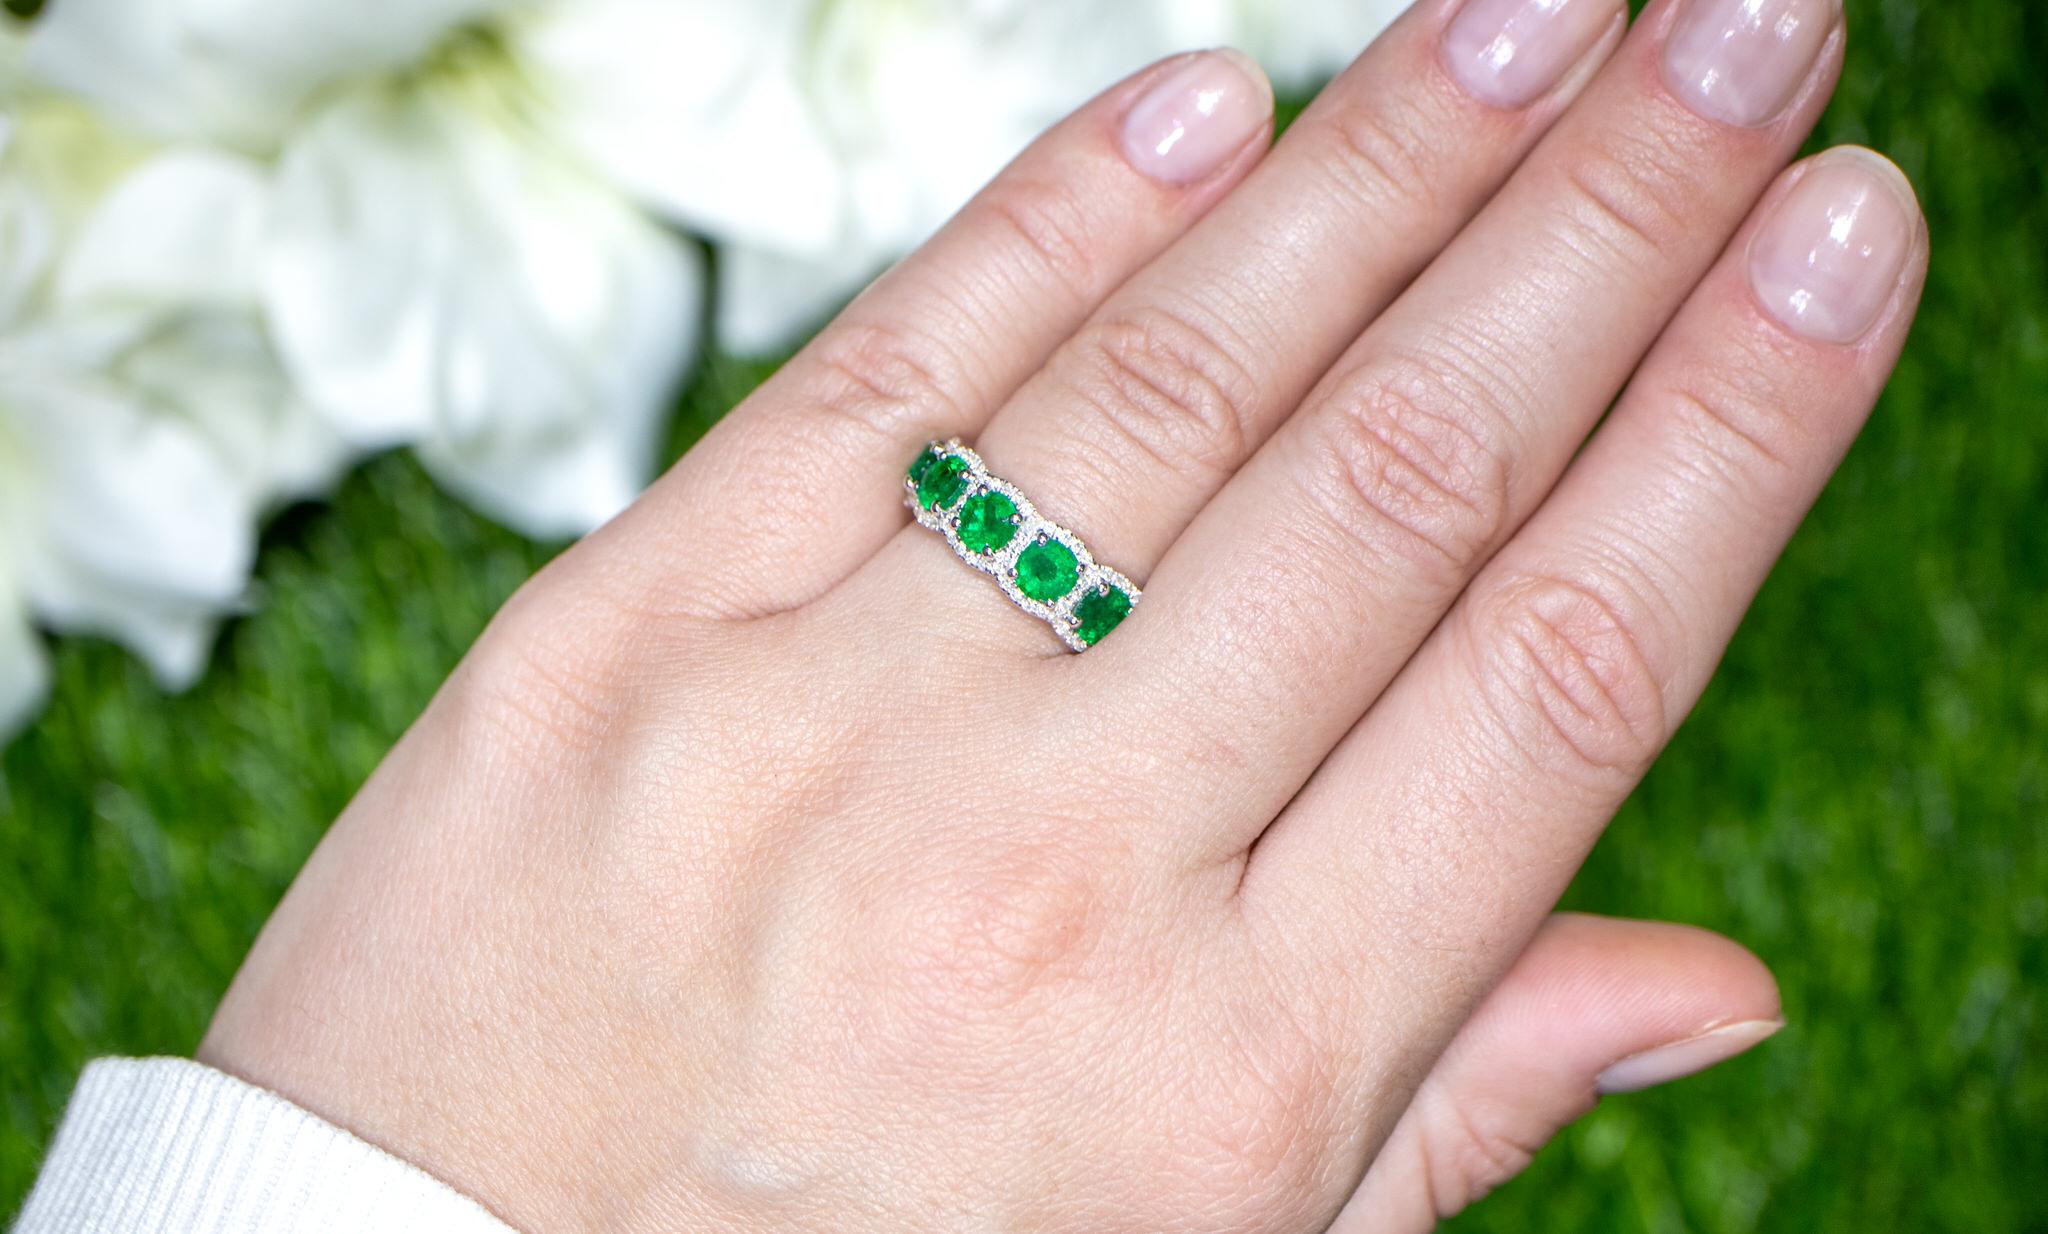 It comes with the Gemological Appraisal by GIA GG/AJP
All Gemstones are Natural
Emeralds = 1.71 Carats
Diamonds = 0.26 Carats
Metal: 18K White Gold
Ring Size: 6.25* US
*It can be resized complimentary